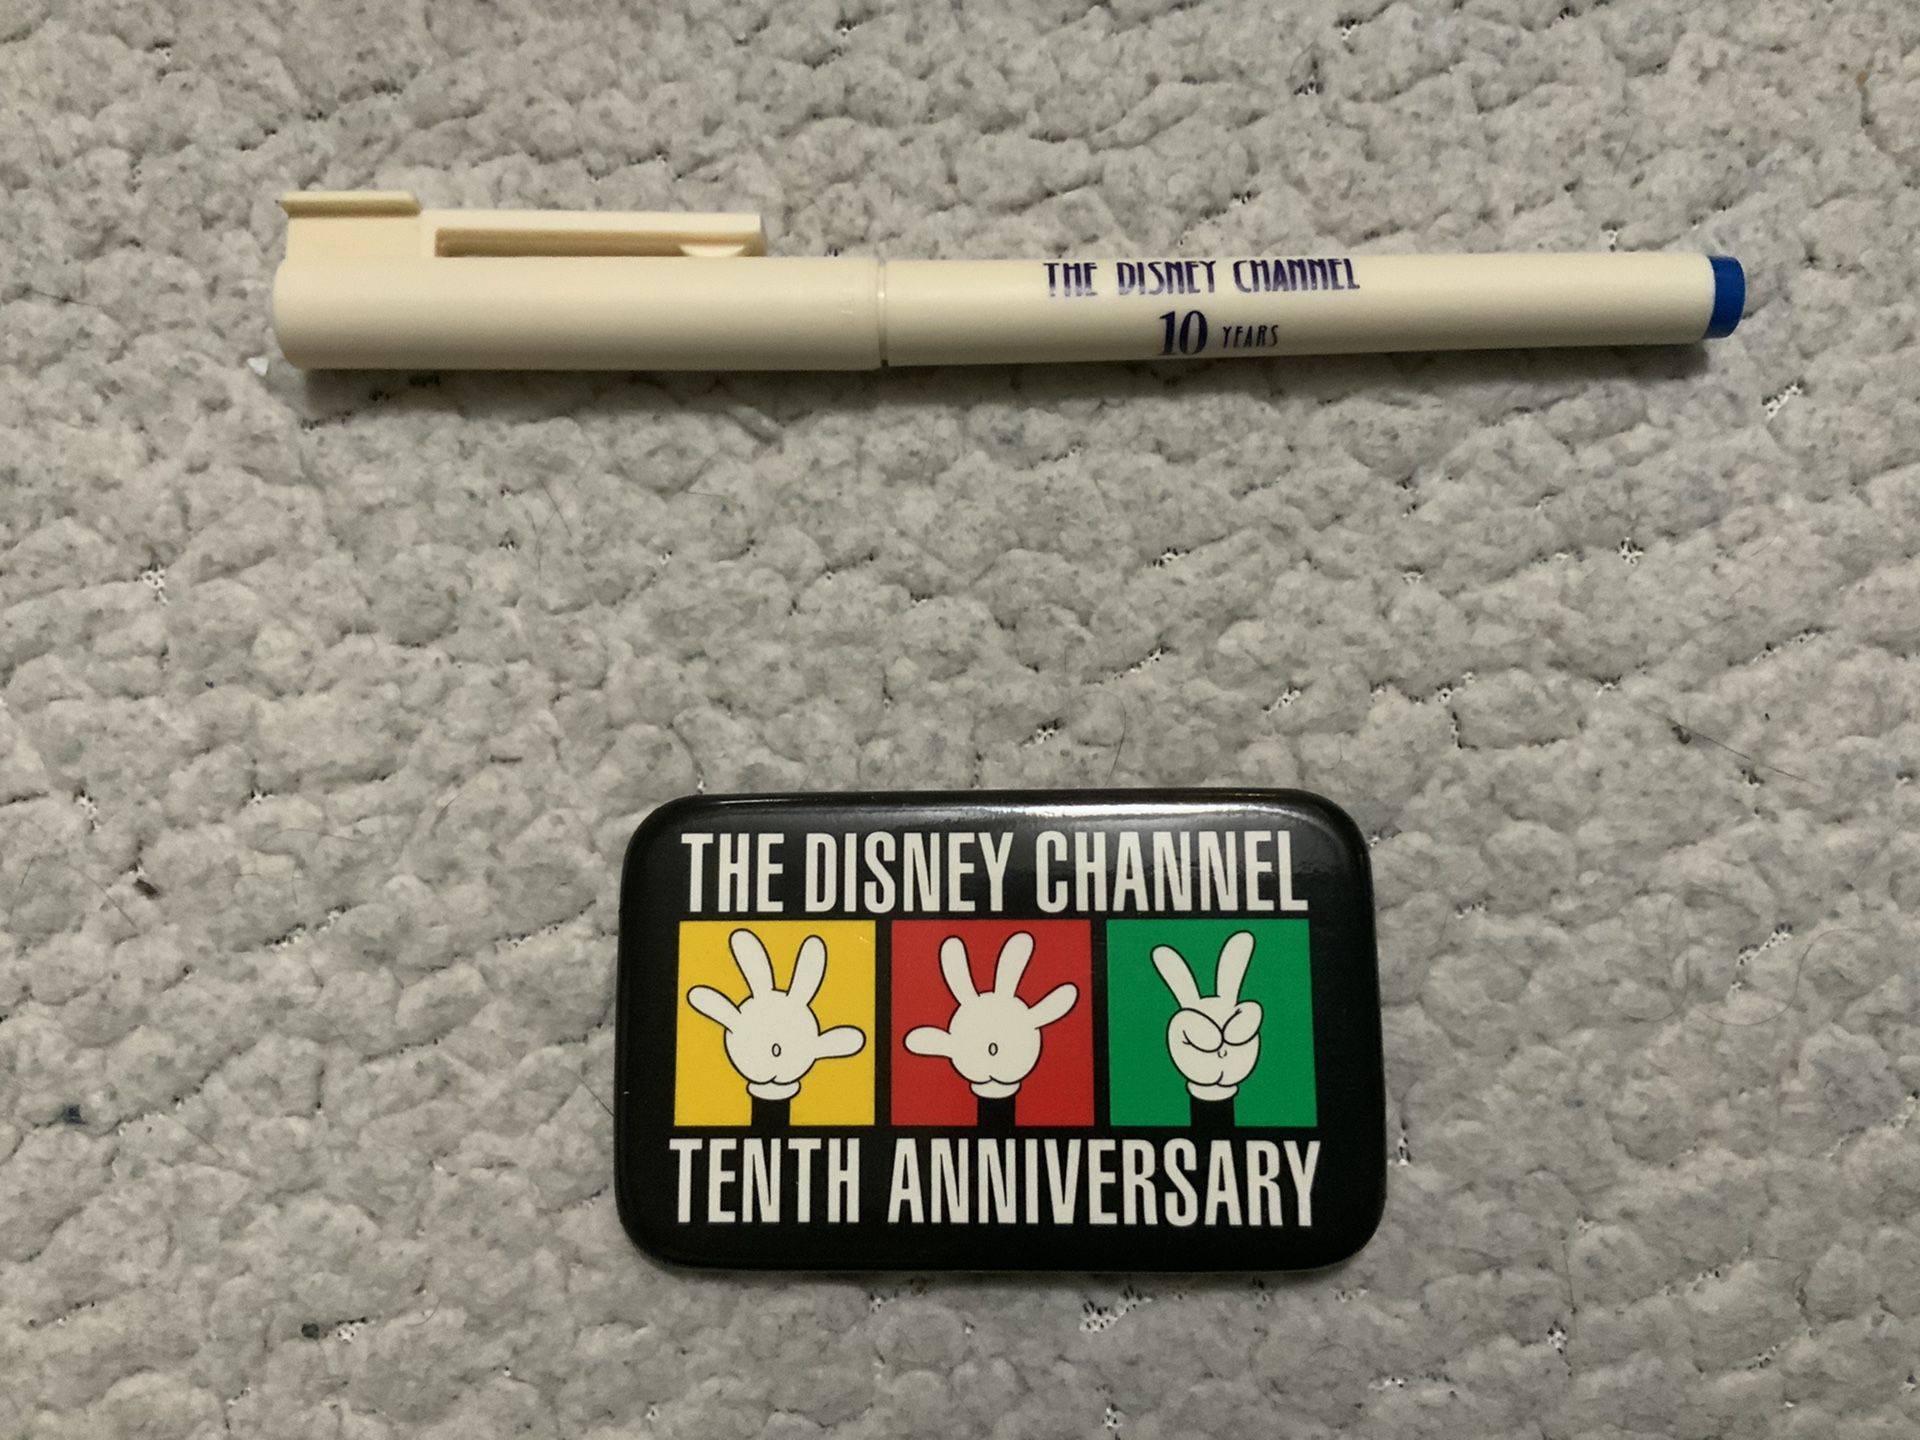 NEW Walt Disney's - The Disney Channel 10th Anniversary Button AND The Disney Channel 10 Year Pen ( never used)